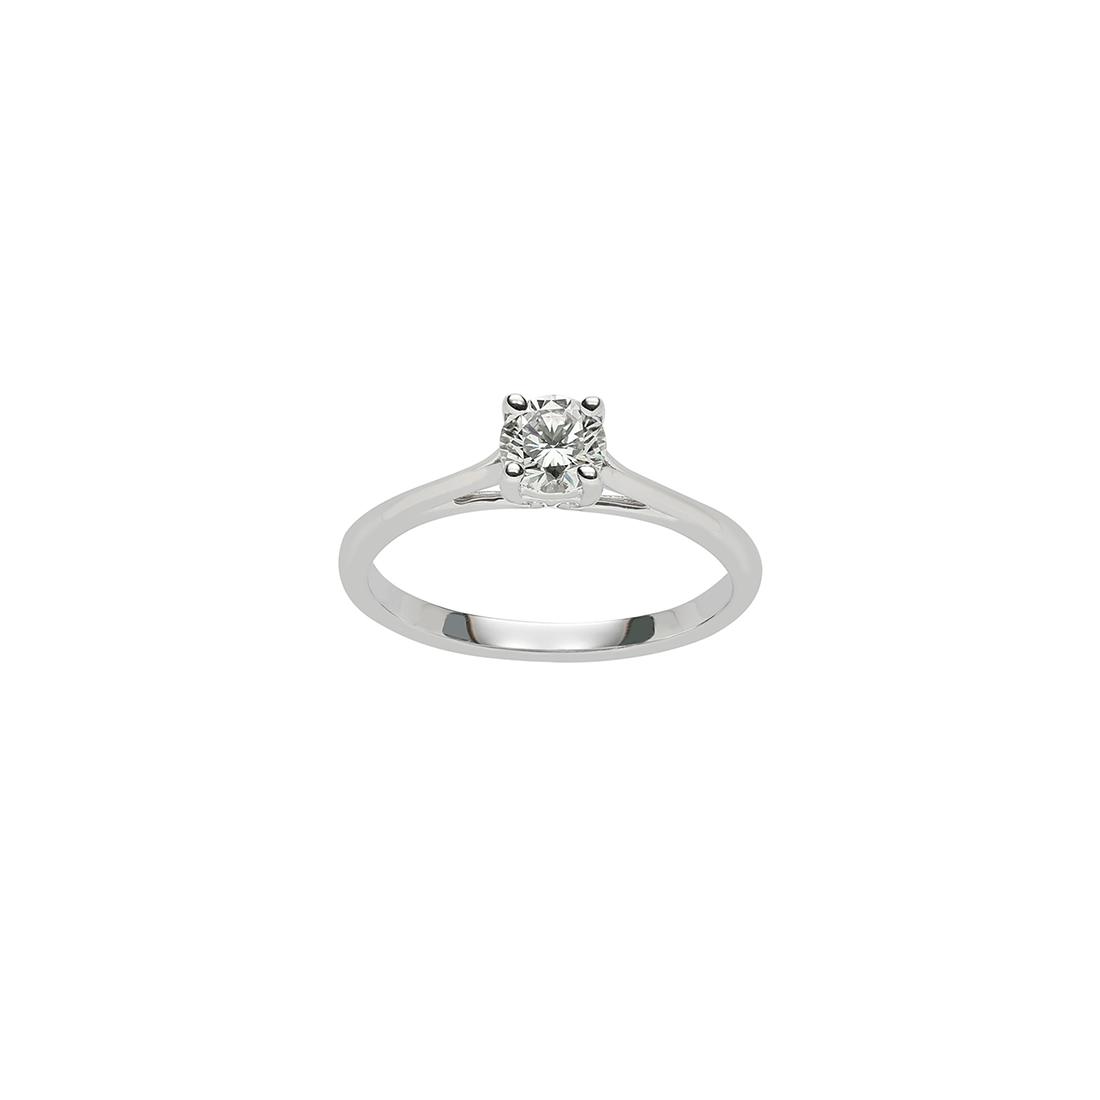 Fink's Exclusive 14K White Gold Solitaire Diamond Cathedral Engagement Ring